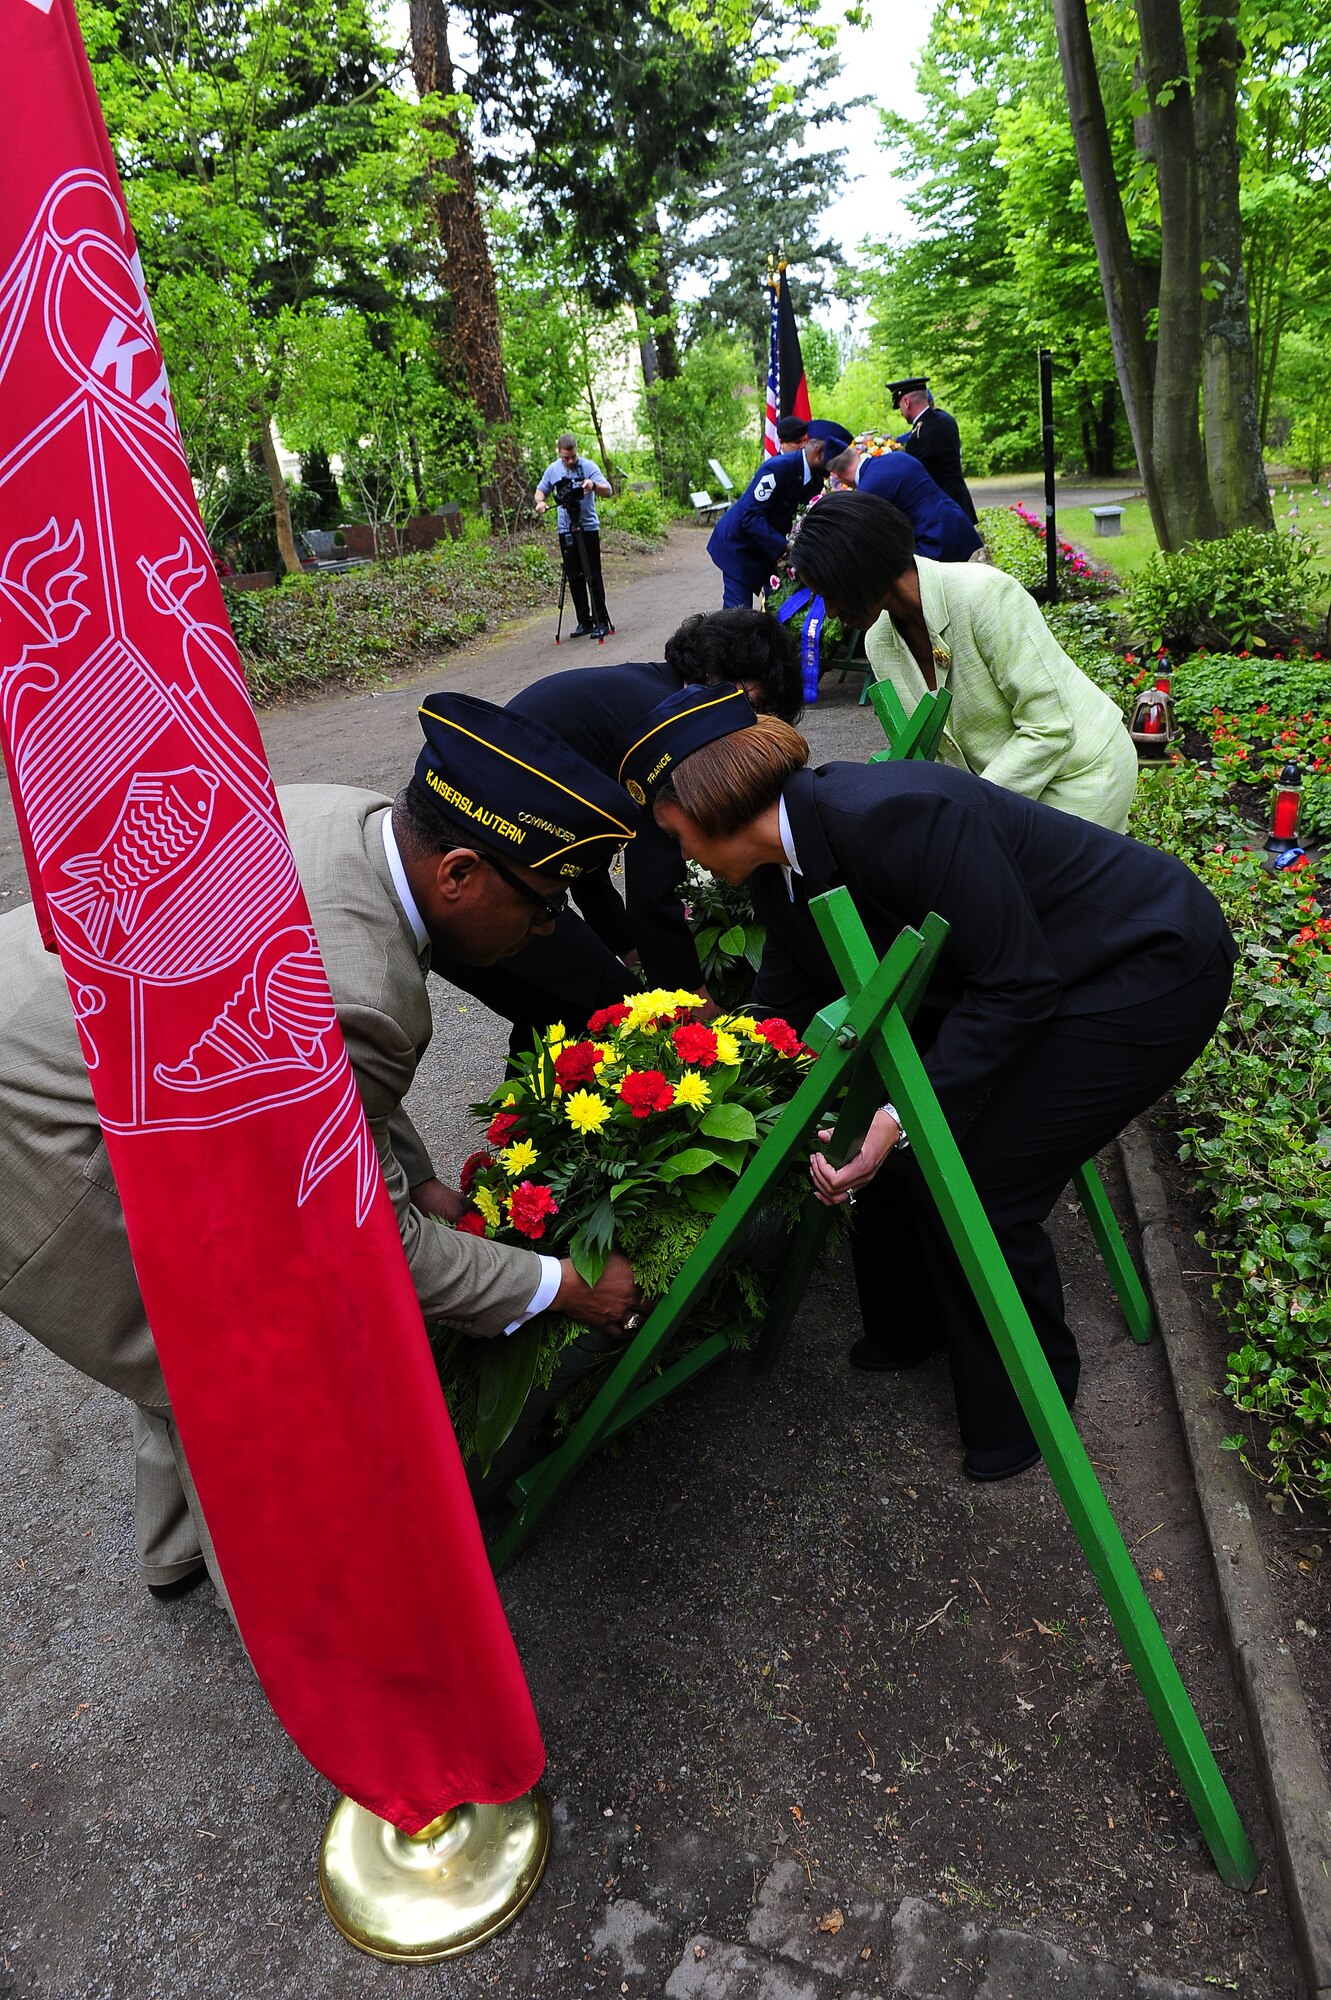 Ramstein area leadership lift wreathes during a ceremony at the Kinder graves memorial, Kaiserslautern Germany, May 19, 2012.The memorial service is held annually the week following Mother's Day to honor the children who weren't able to be buried in America. (U.S. Air Force photo/Senior Airman Aaron-Forrest Wainwright)